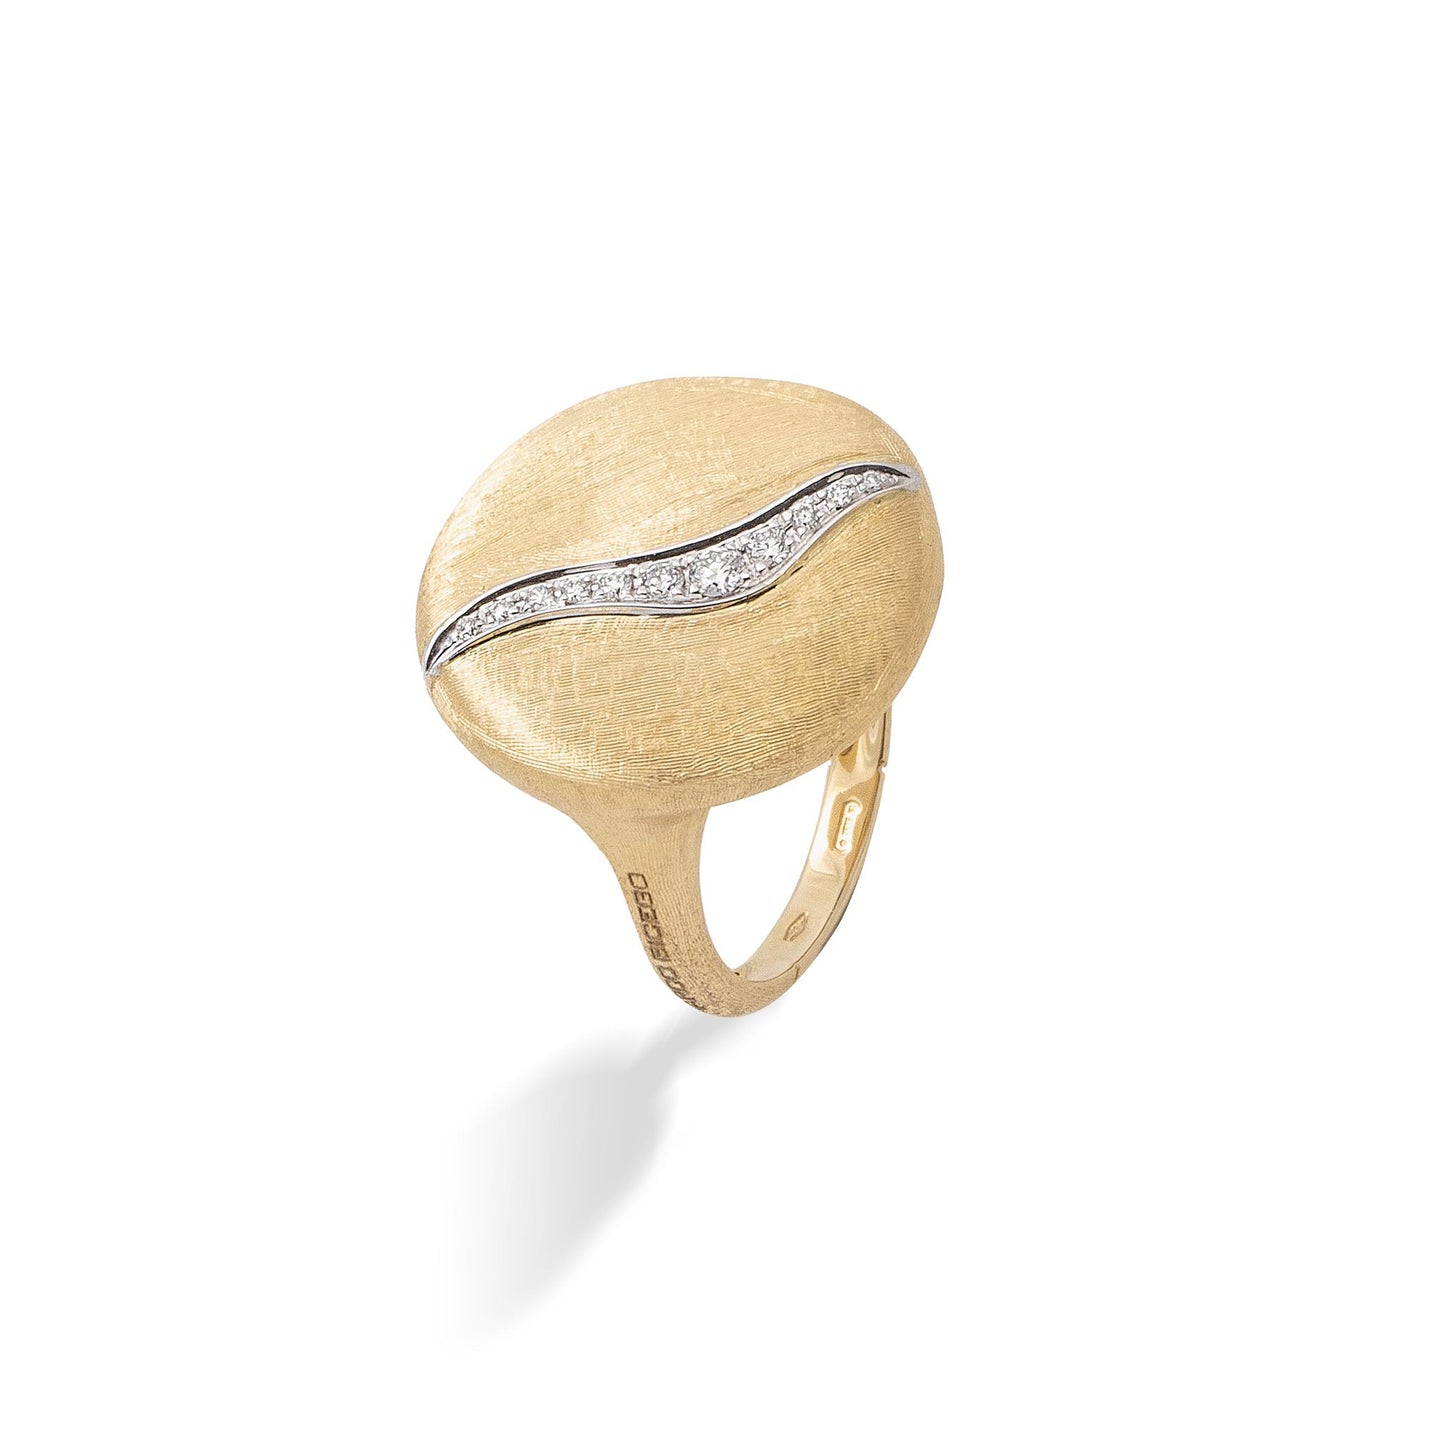 Marco Bicego Limited Edition Jaipur Engraved Ring w/ Diamonds